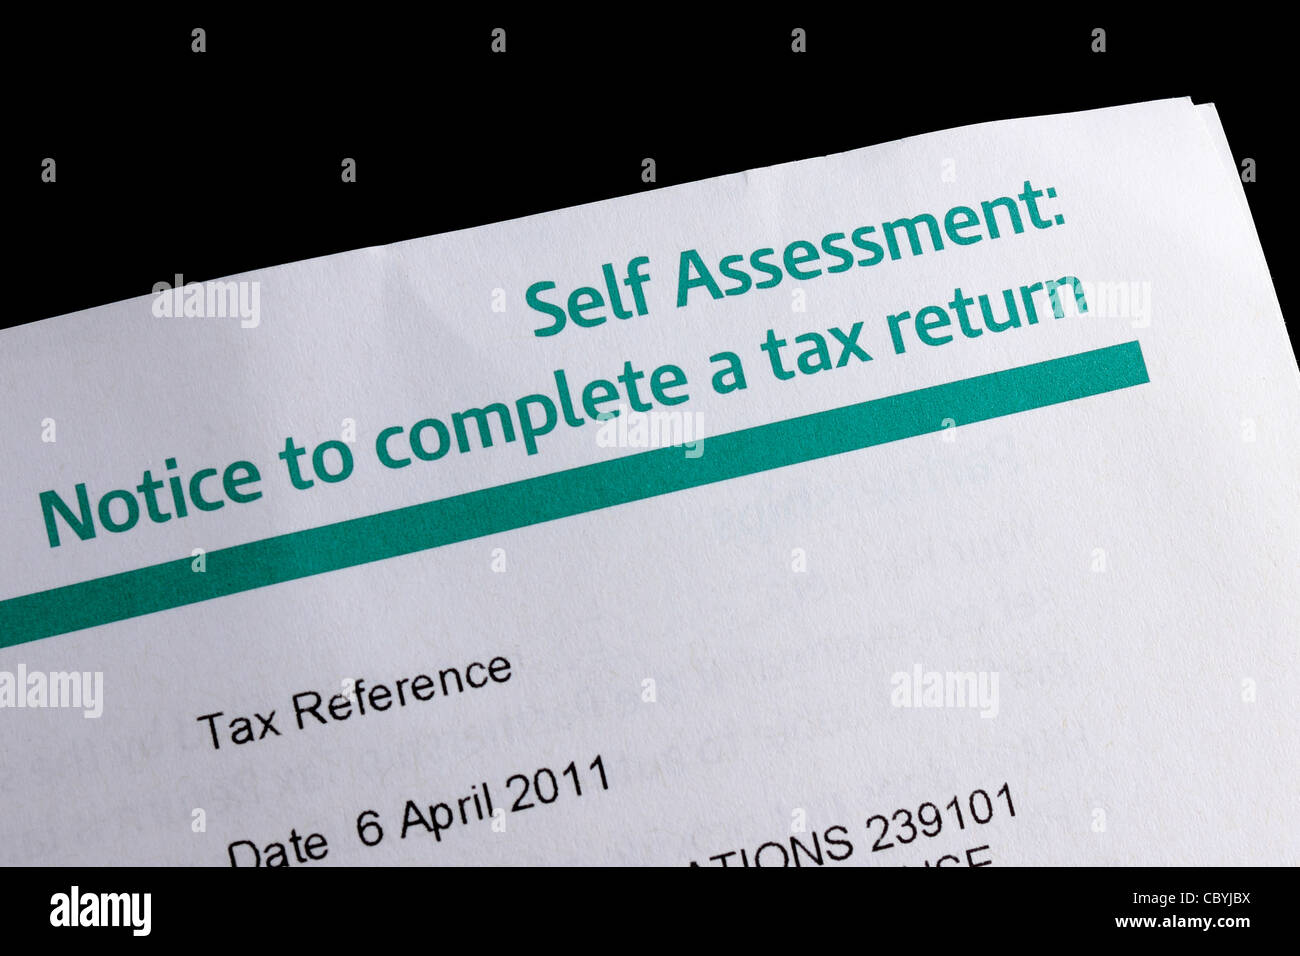 HMRC Self Assessment Notice to complete a tax return Stock Photo